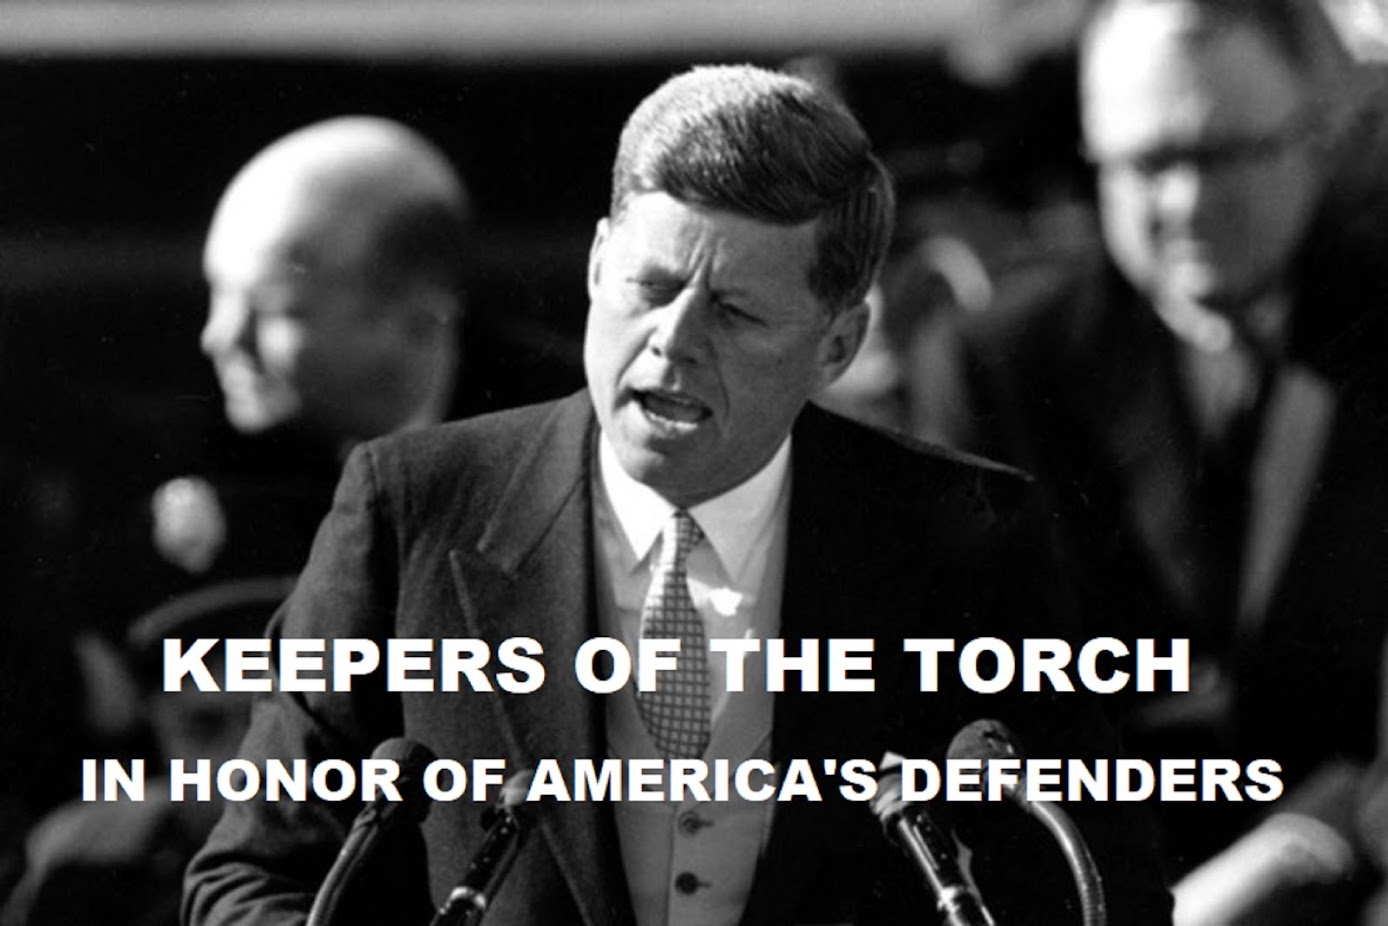 KEEPERS OF THE TORCH -IN HONOR OF AMERICA'S DEFENDERS